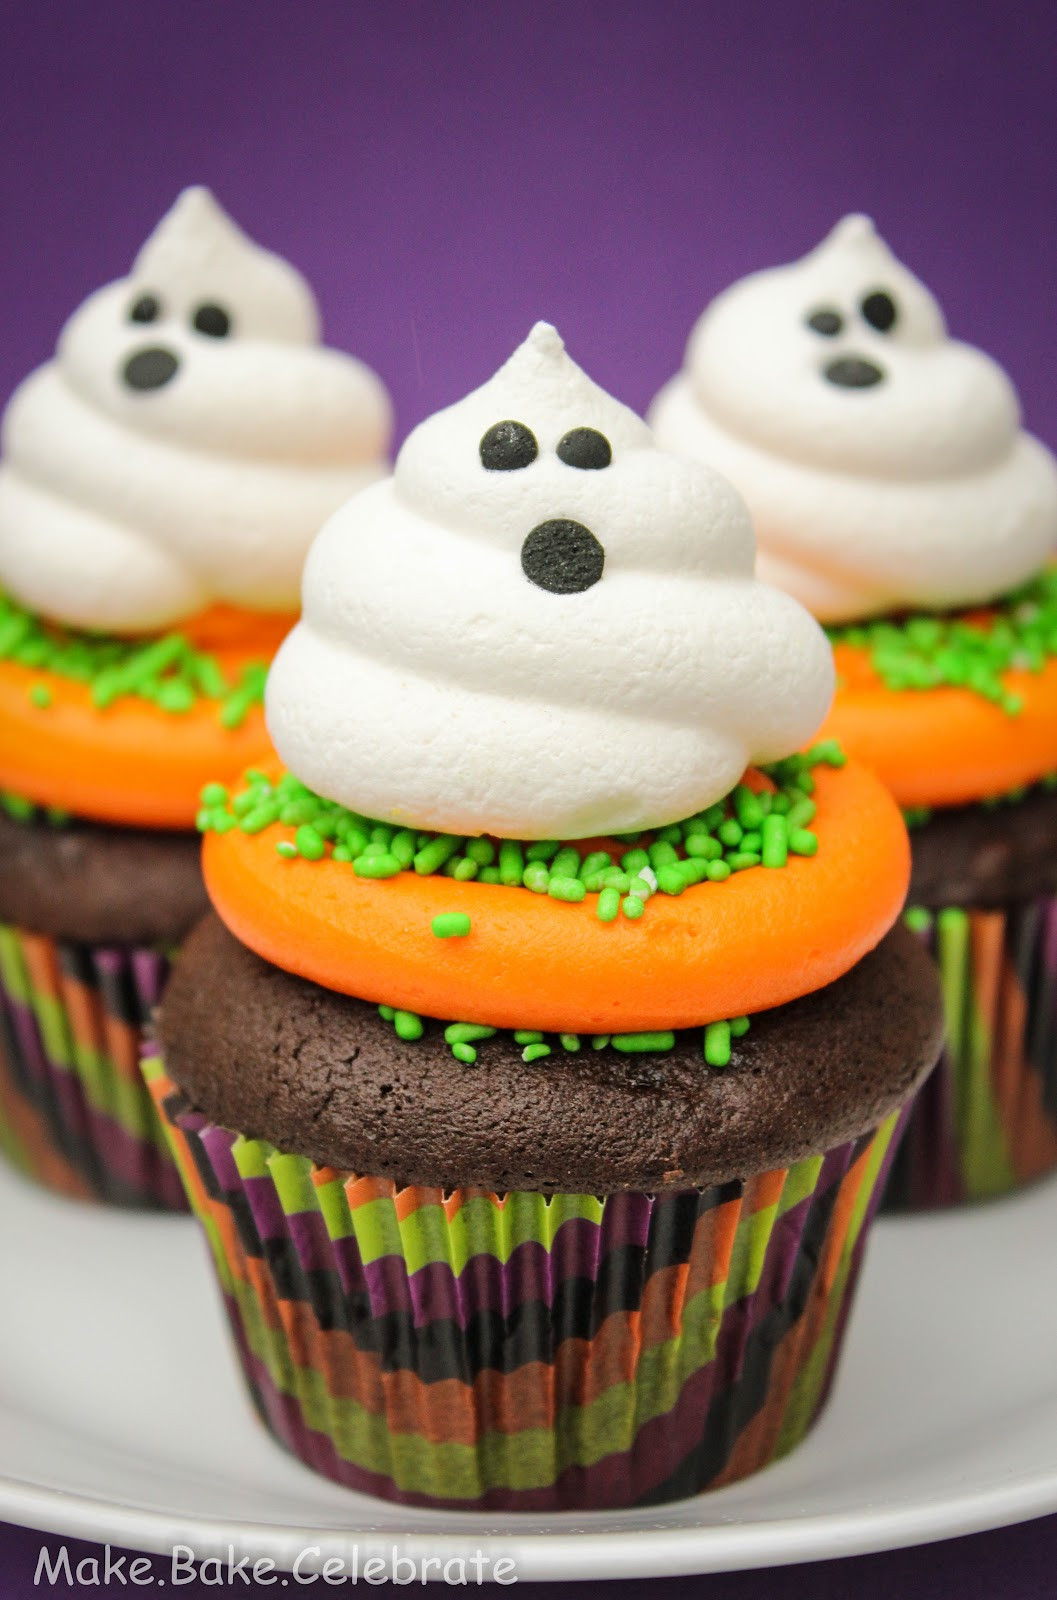 Cupcakes For Halloween
 MBC Boo tiful cupcakes d some BIG news